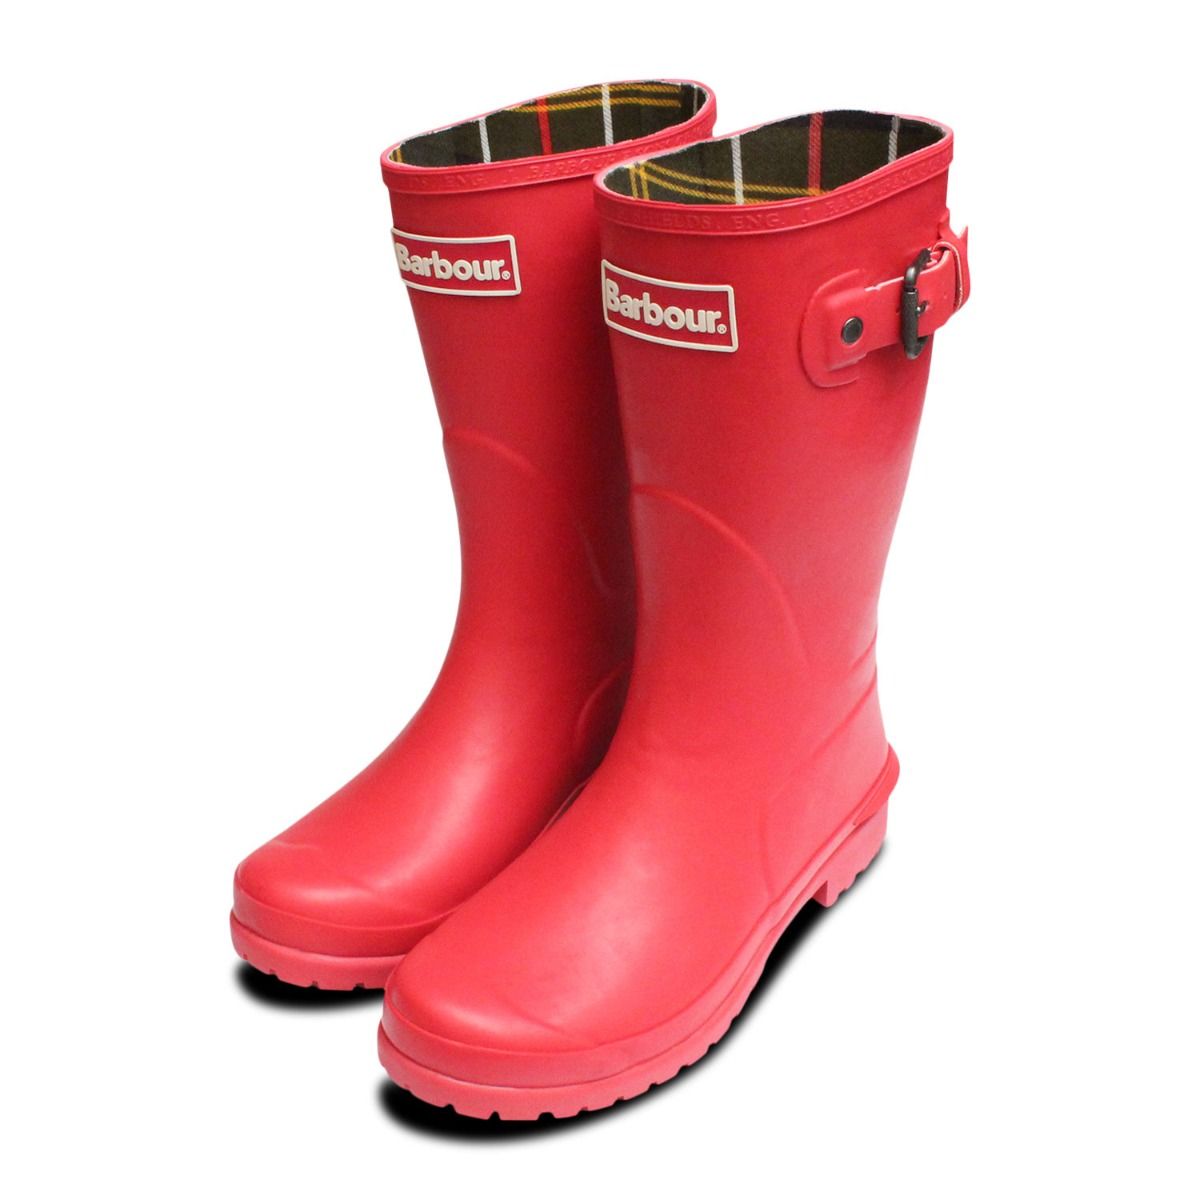 barbour pink wellies